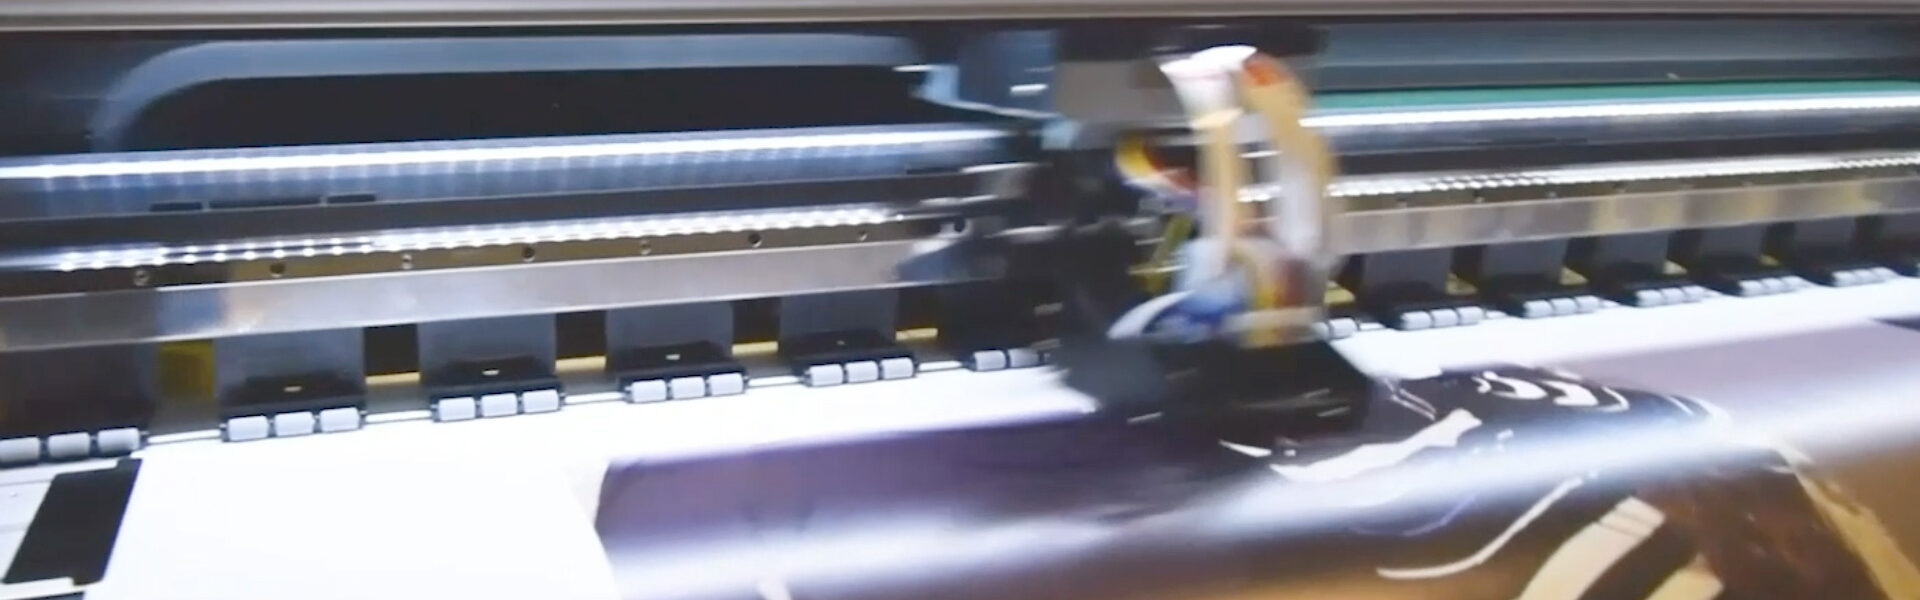 Roll-to-roll printing